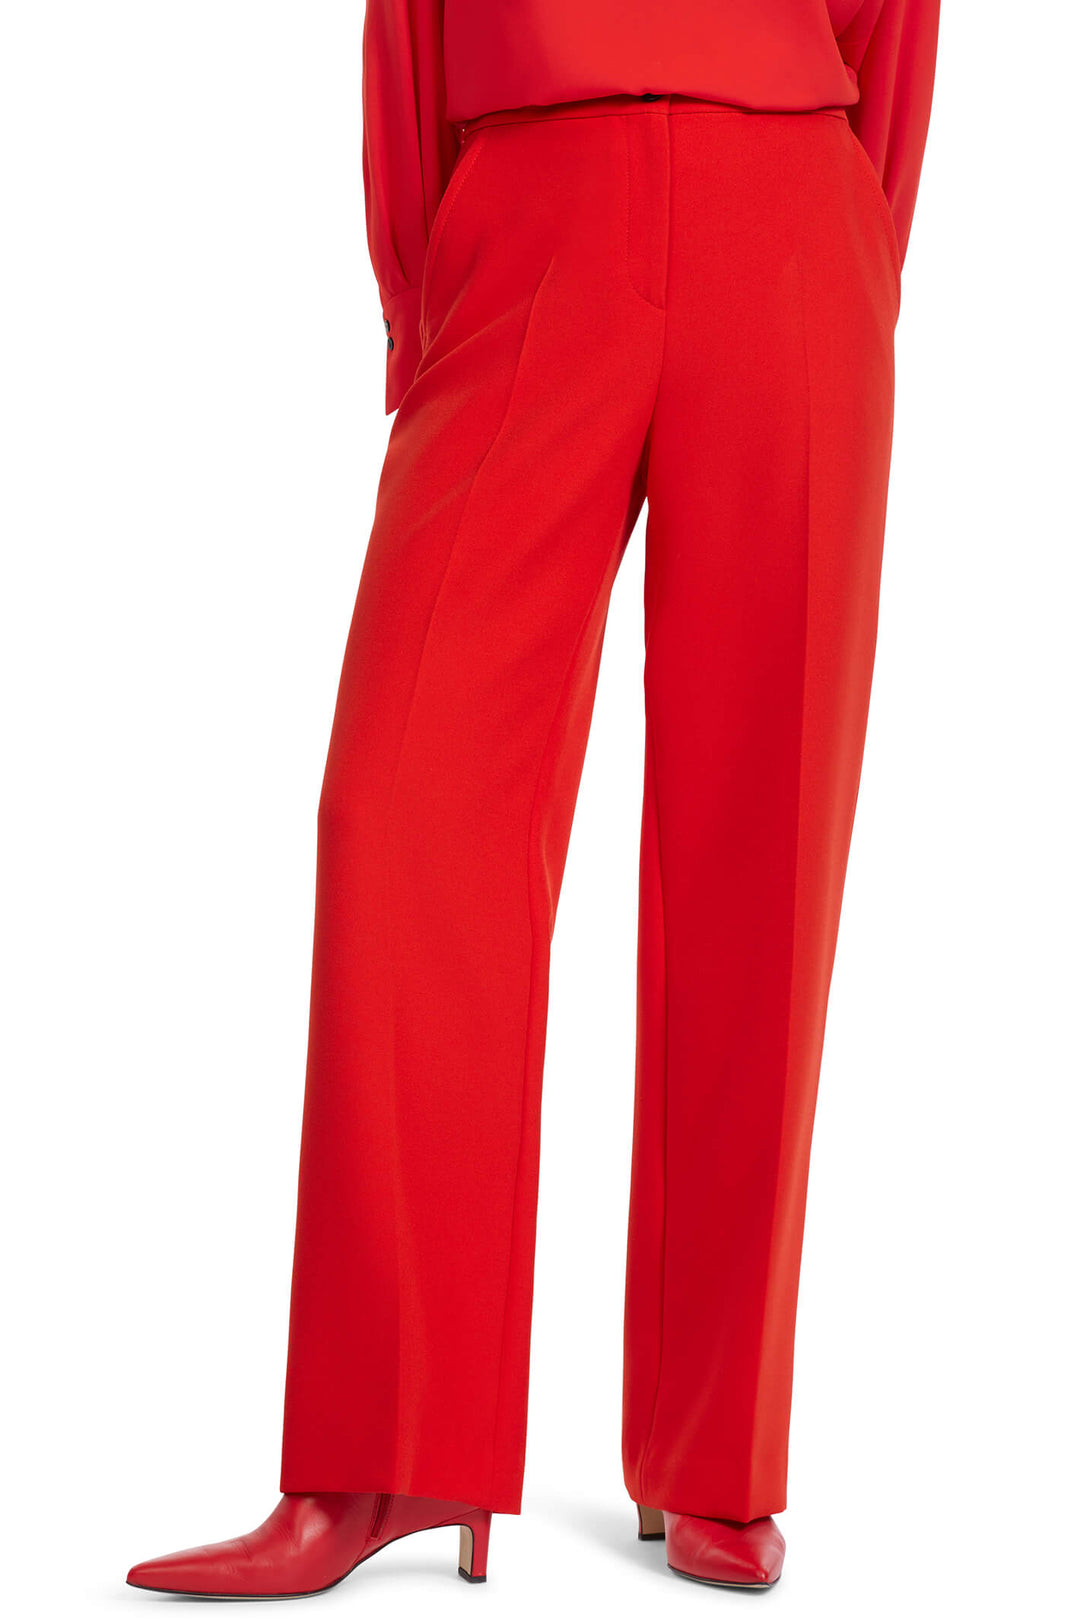 Marc Cain VC 81.52 W10 Red Wide Leg Trousers - Olivia Grace Fashion